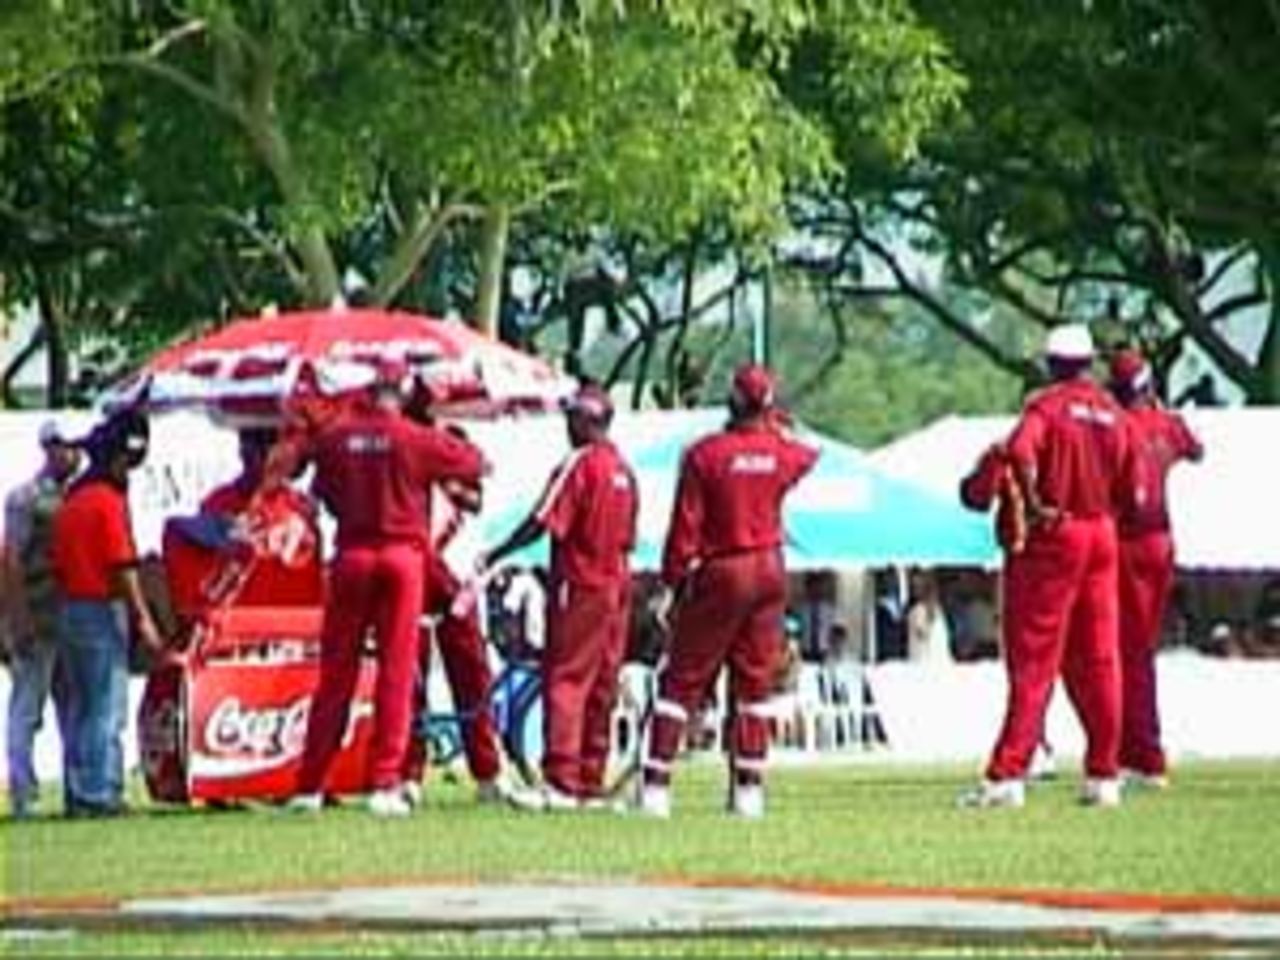 The West Indians enjoy a well deserved drinks break, India v West Indies (3rd ODI), Coca-Cola Singapore Challenge, 1999-2000, Kallang Ground, Singapore, 5 Sep 1999.